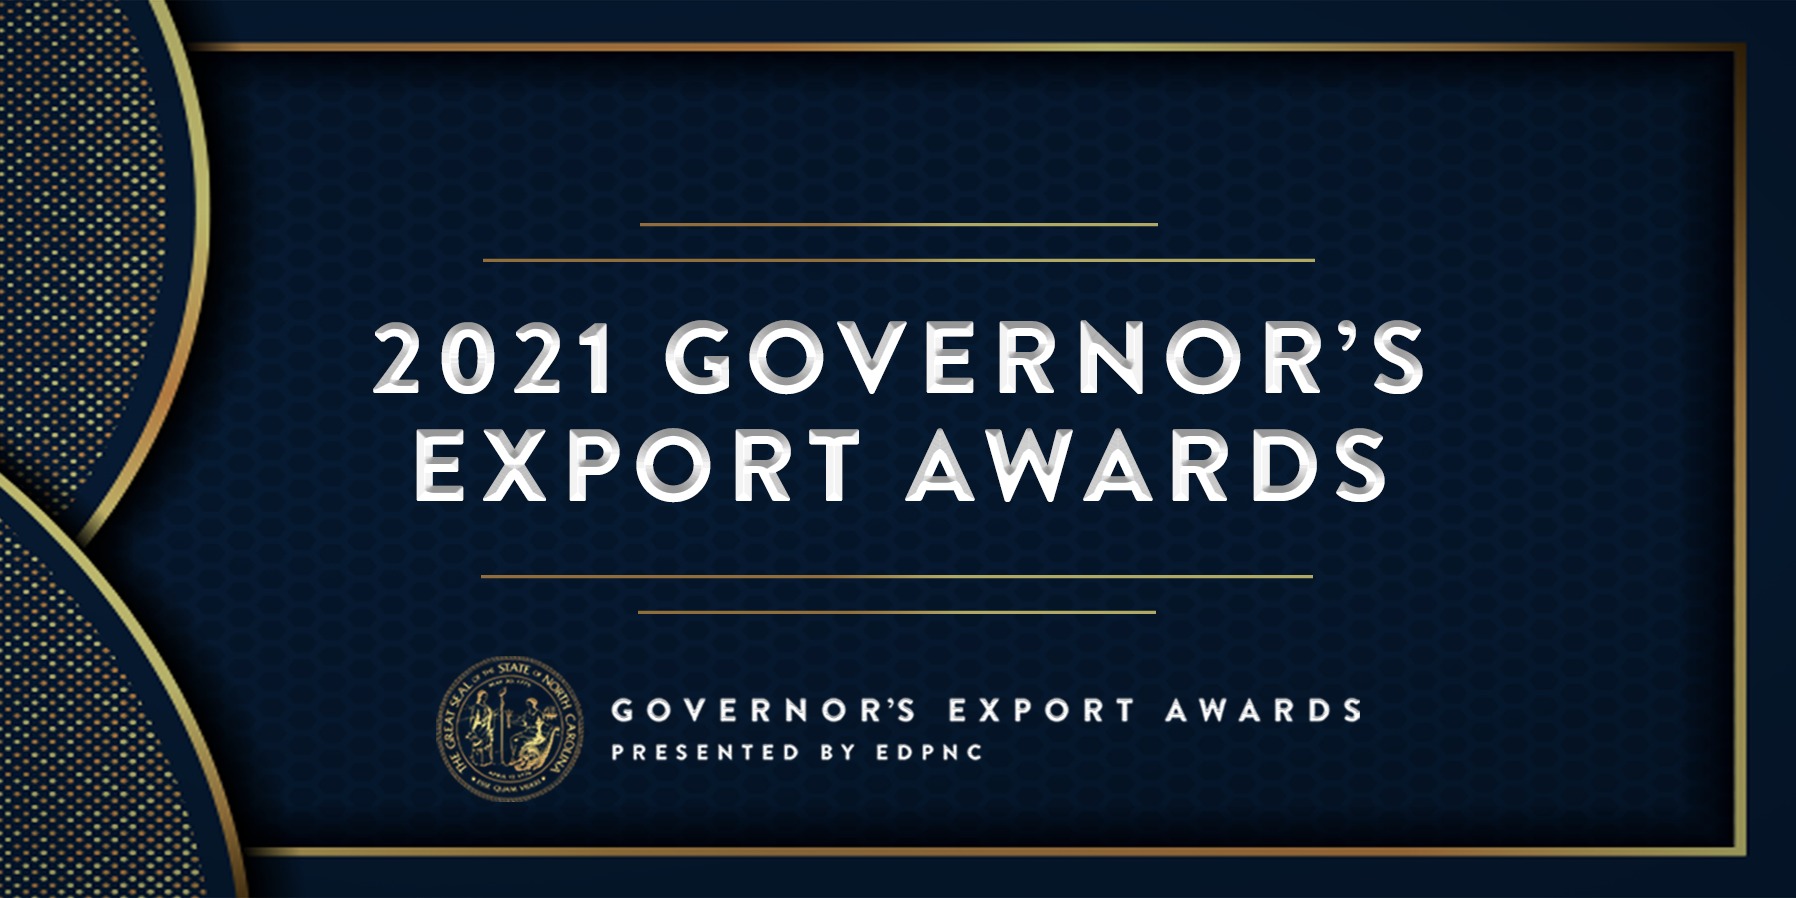 2021 Governor's Export Awards graphic